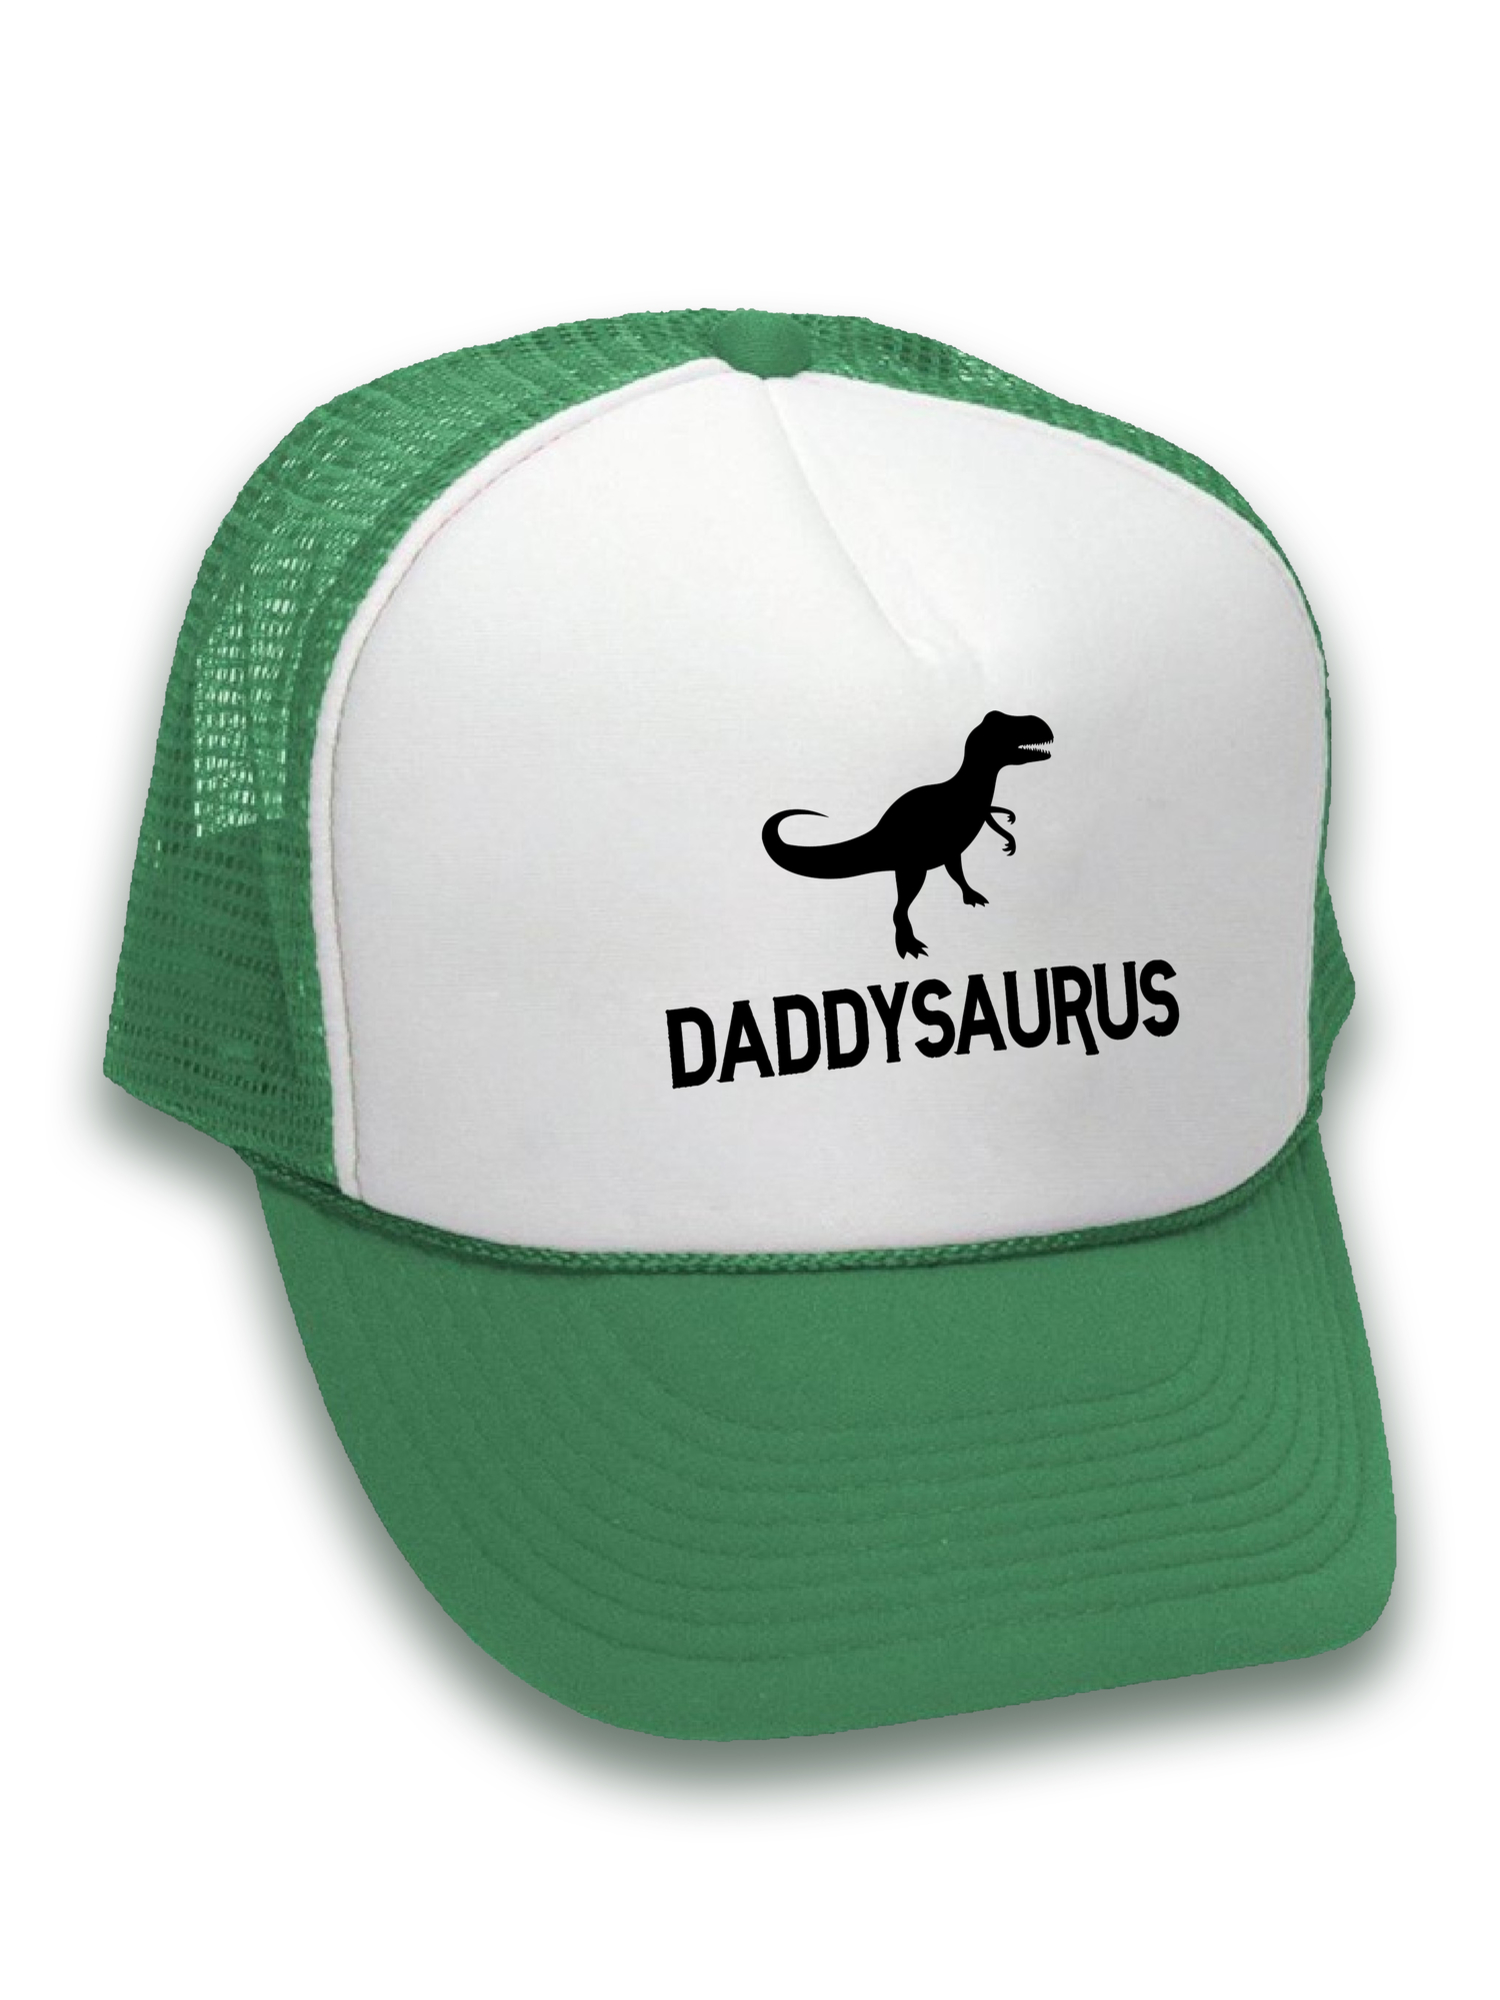 Awkward Styles Gifts for Dad Daddysaurus Hat Dinosaur Dad Trucker Hat Funny Dad Gifts for Father's Day Geek Dad Snapback Hat Hat Accessories for Dad Dinosaur Gifts for Dad Father Trucker Hat Daddy Cap - image 2 of 6